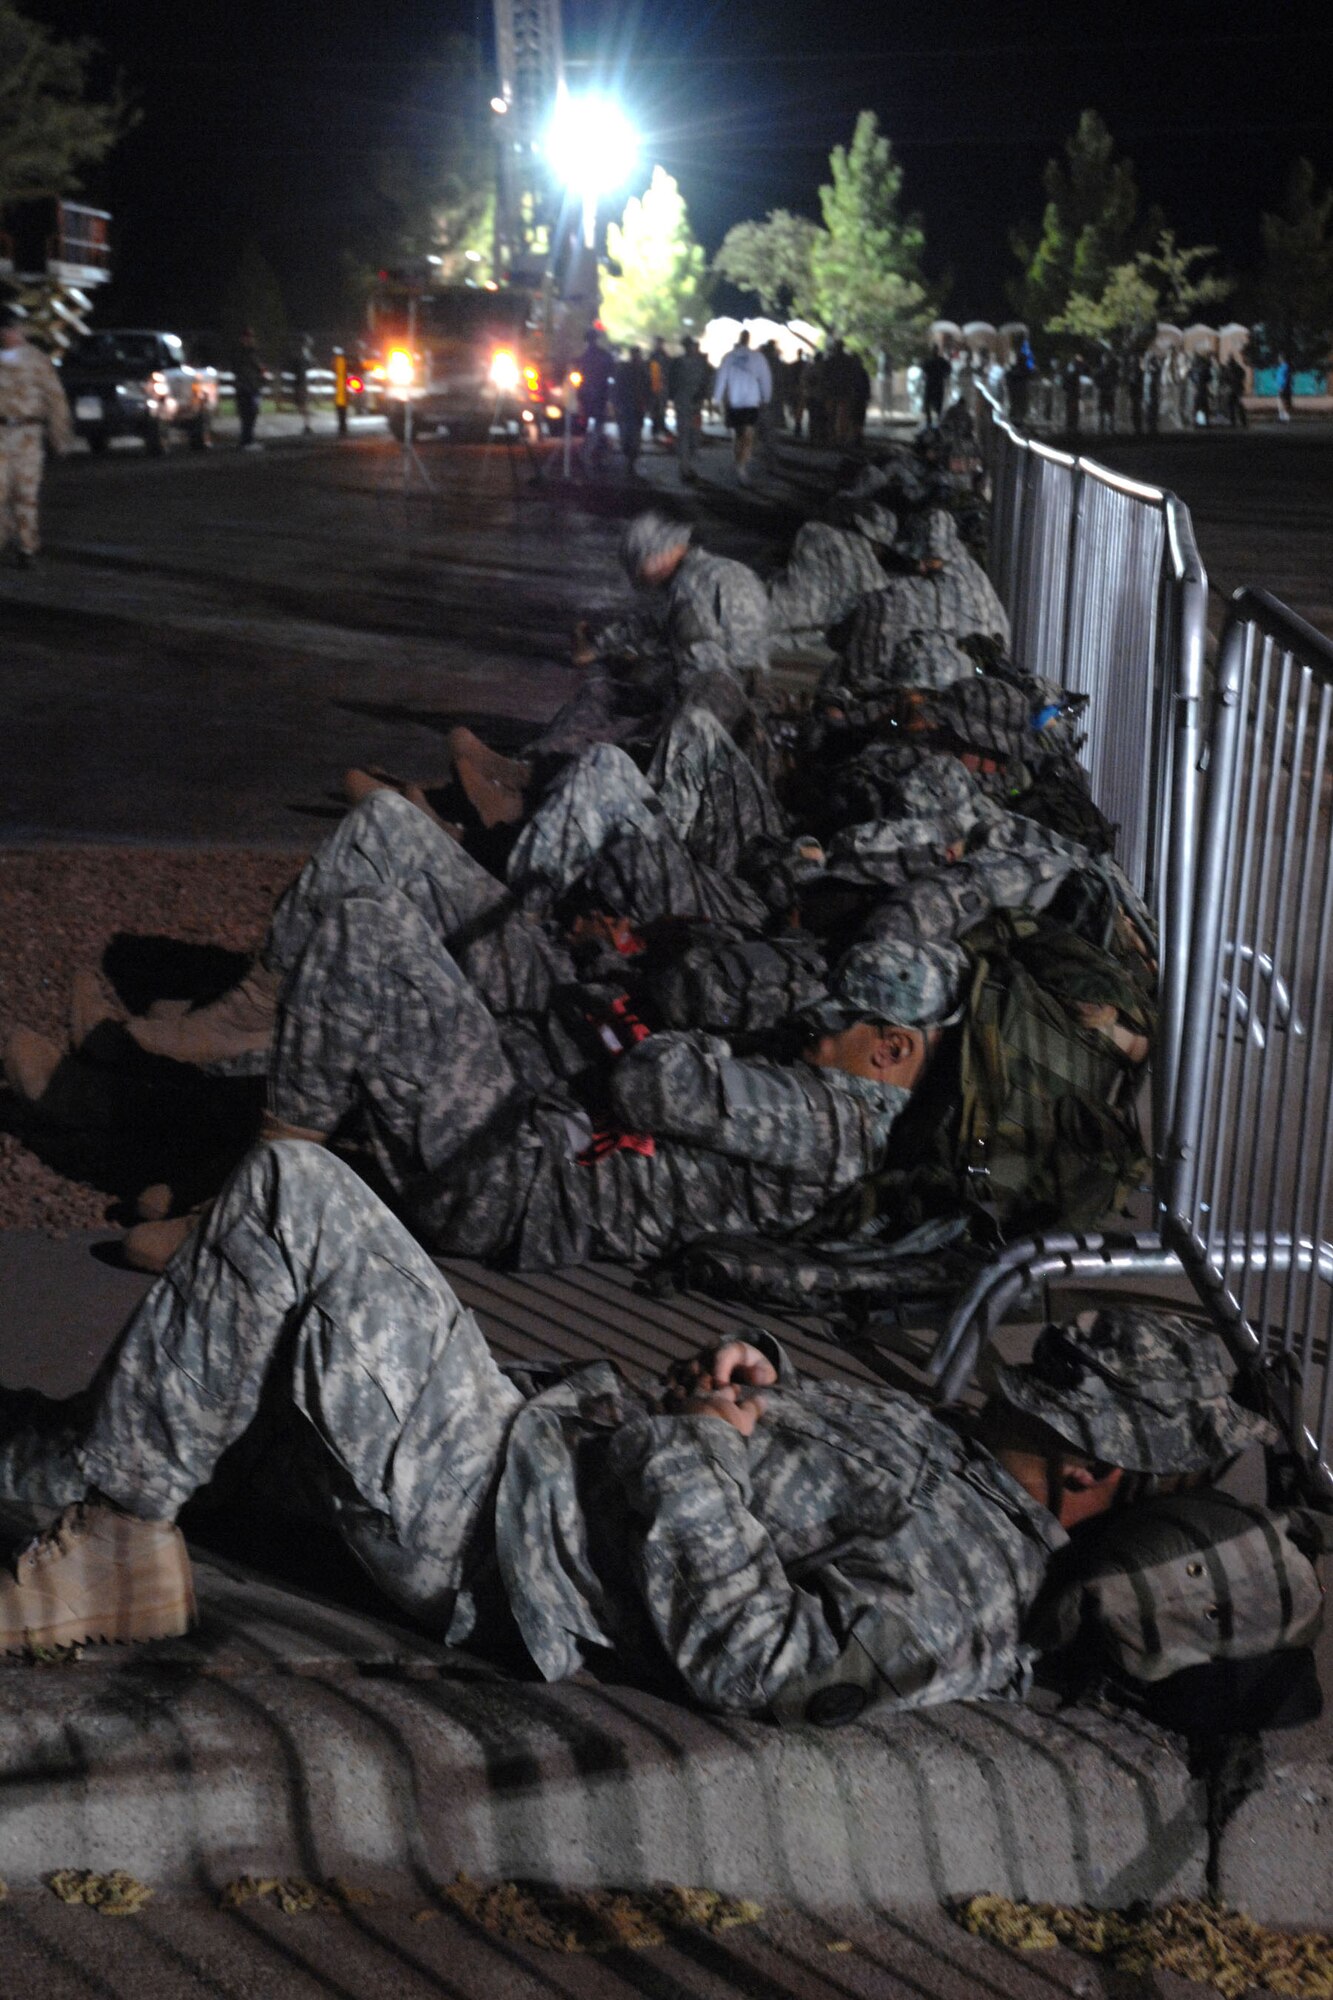 WHITE SANDS MISSILE RANGE, N.M. - Soldiers get some rest before beginning the 19th Annual Bataan Memorial Death March on March 30. More than 4,400 runners and marchers participated in the 26.2 mile or 15-mile run/walk. (U.S. Air Force photo by Airman 1st Class Evelyn Chavez)